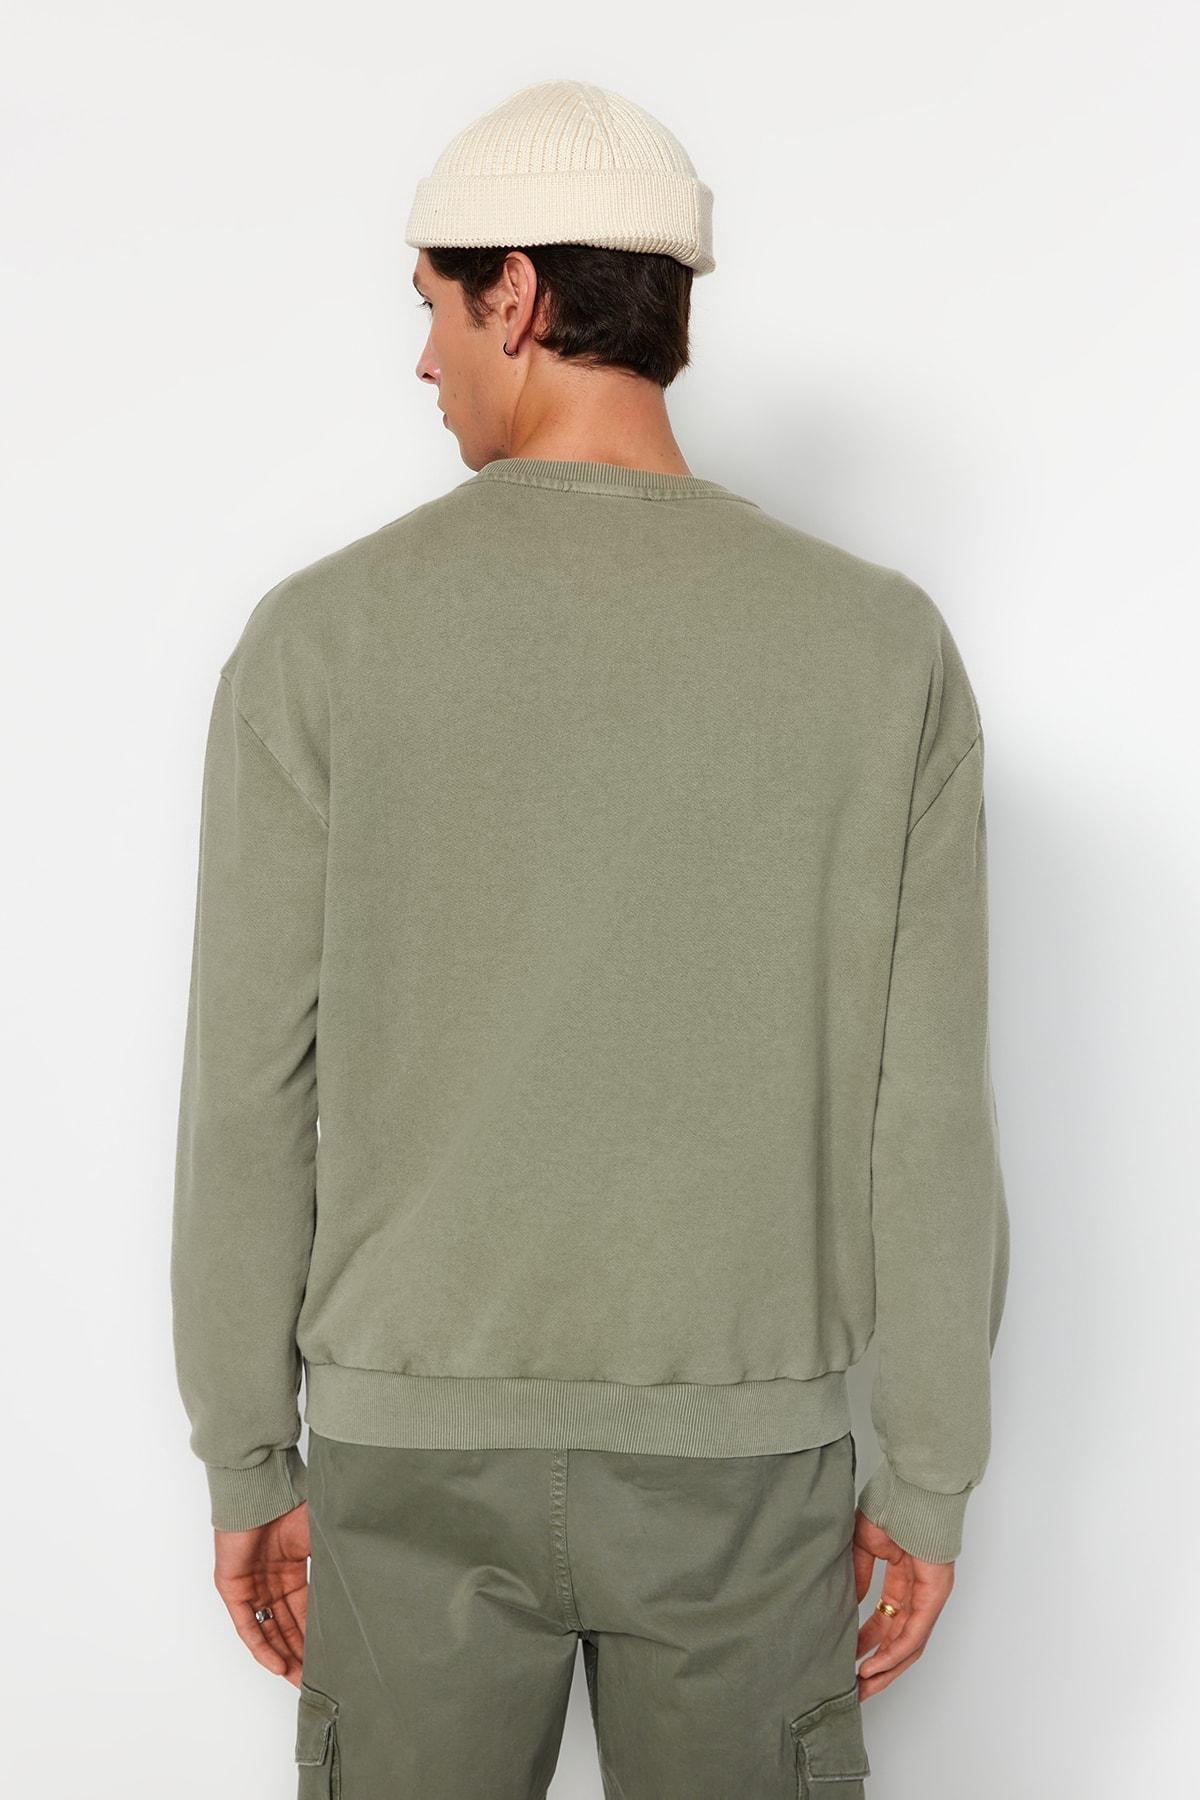 Trendyol - Green Limited Edition Relaxed Sweatshirt